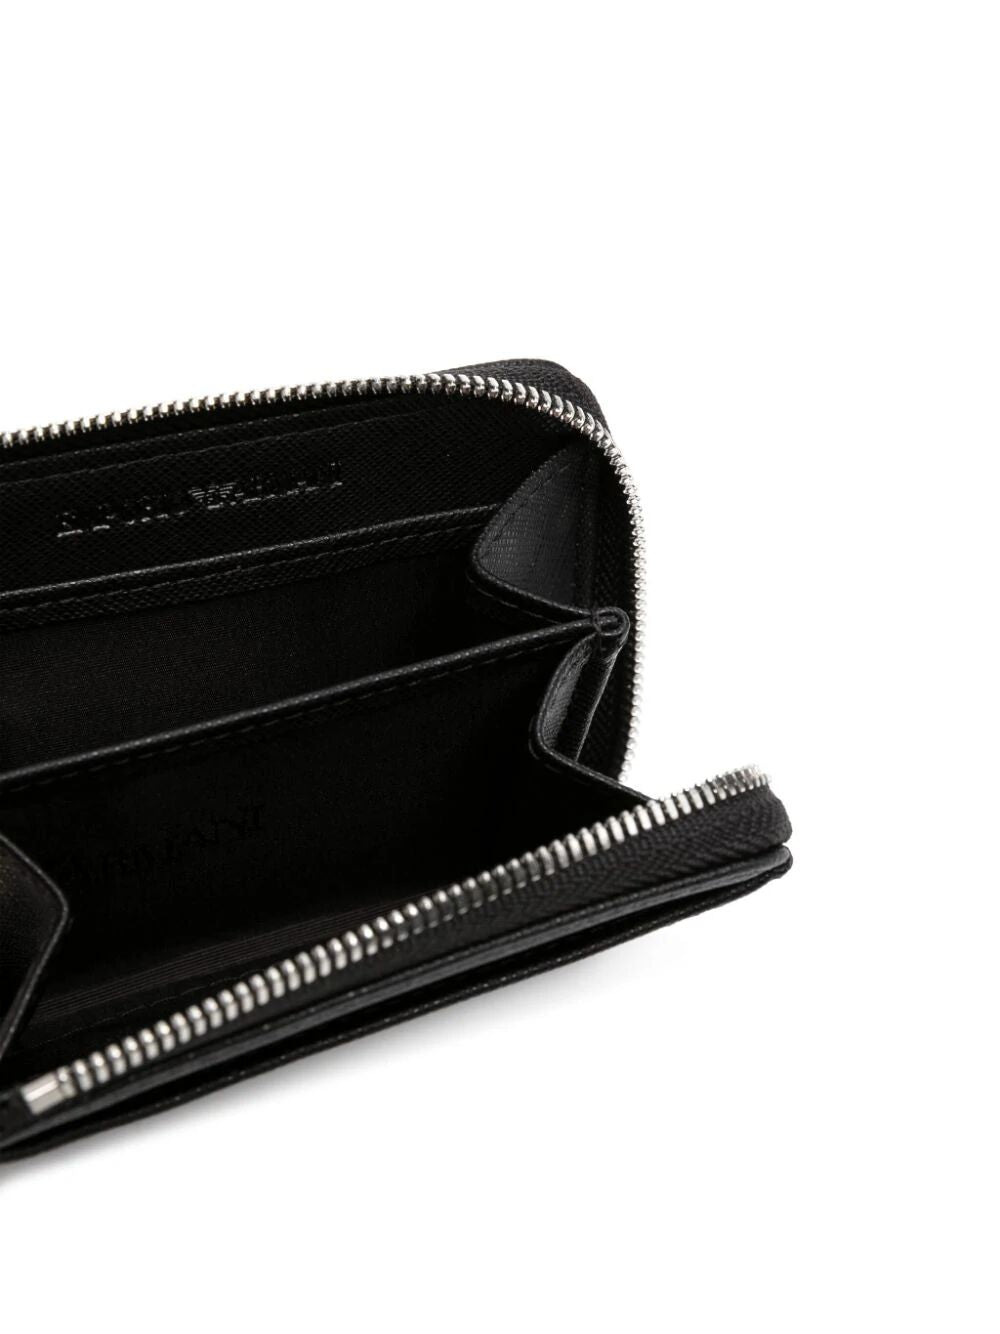 Man`s Compact Wallet